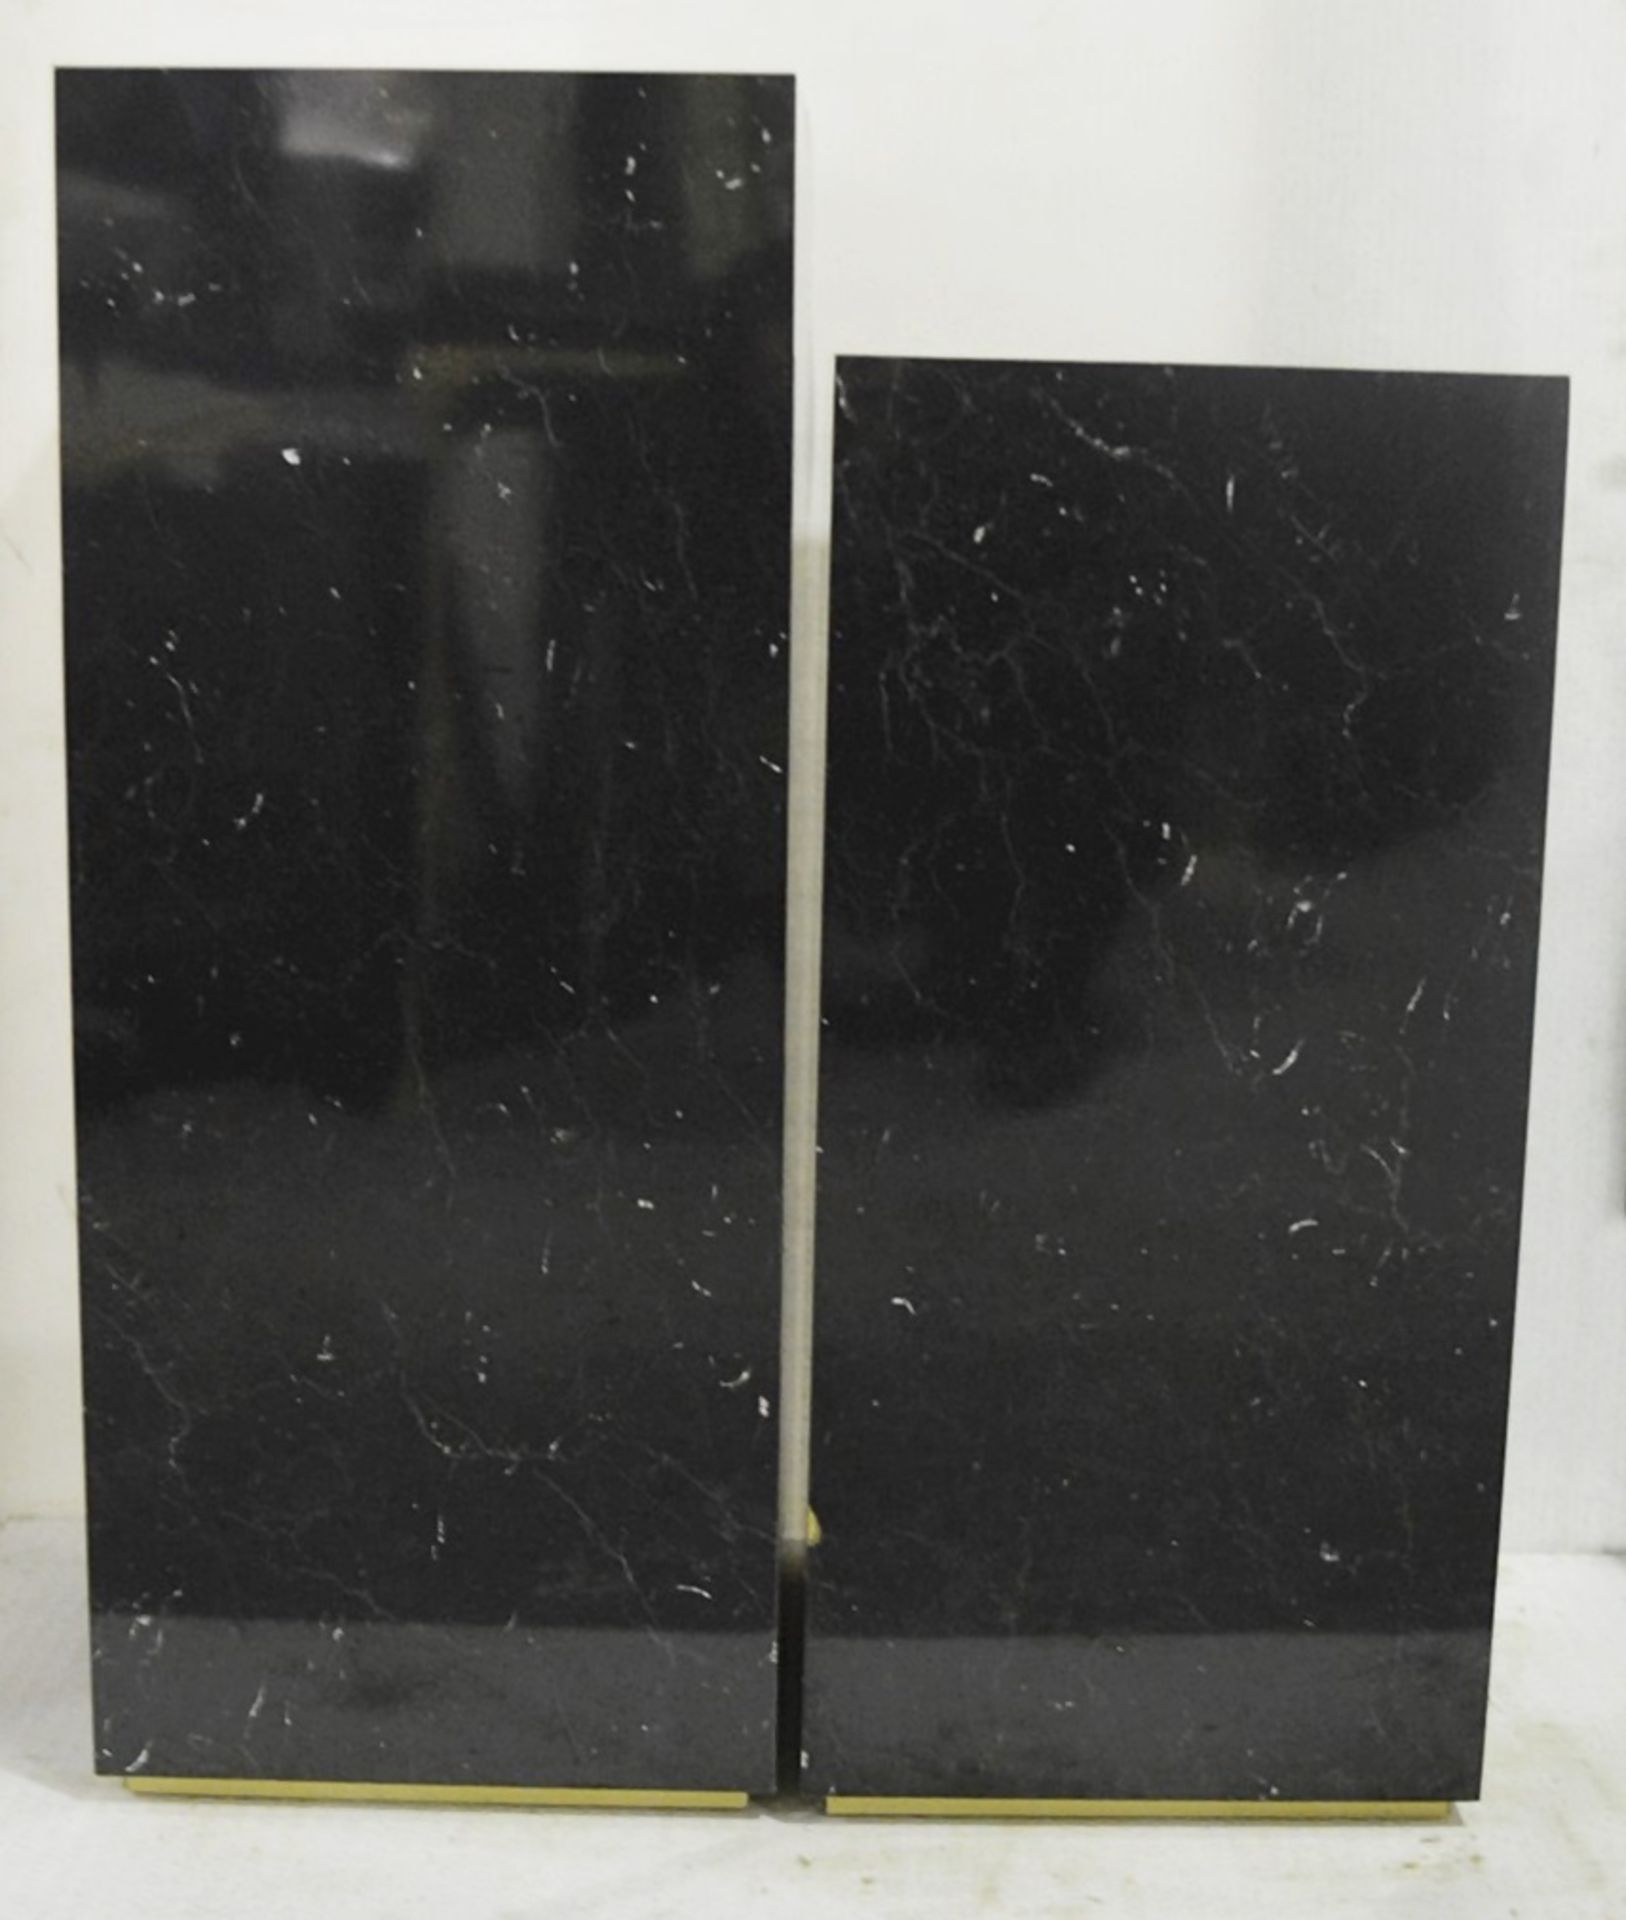 2 x Shop Display Plinths With A Faux-Marble Laminate Finish In BLACK With Brass Coloured Bases